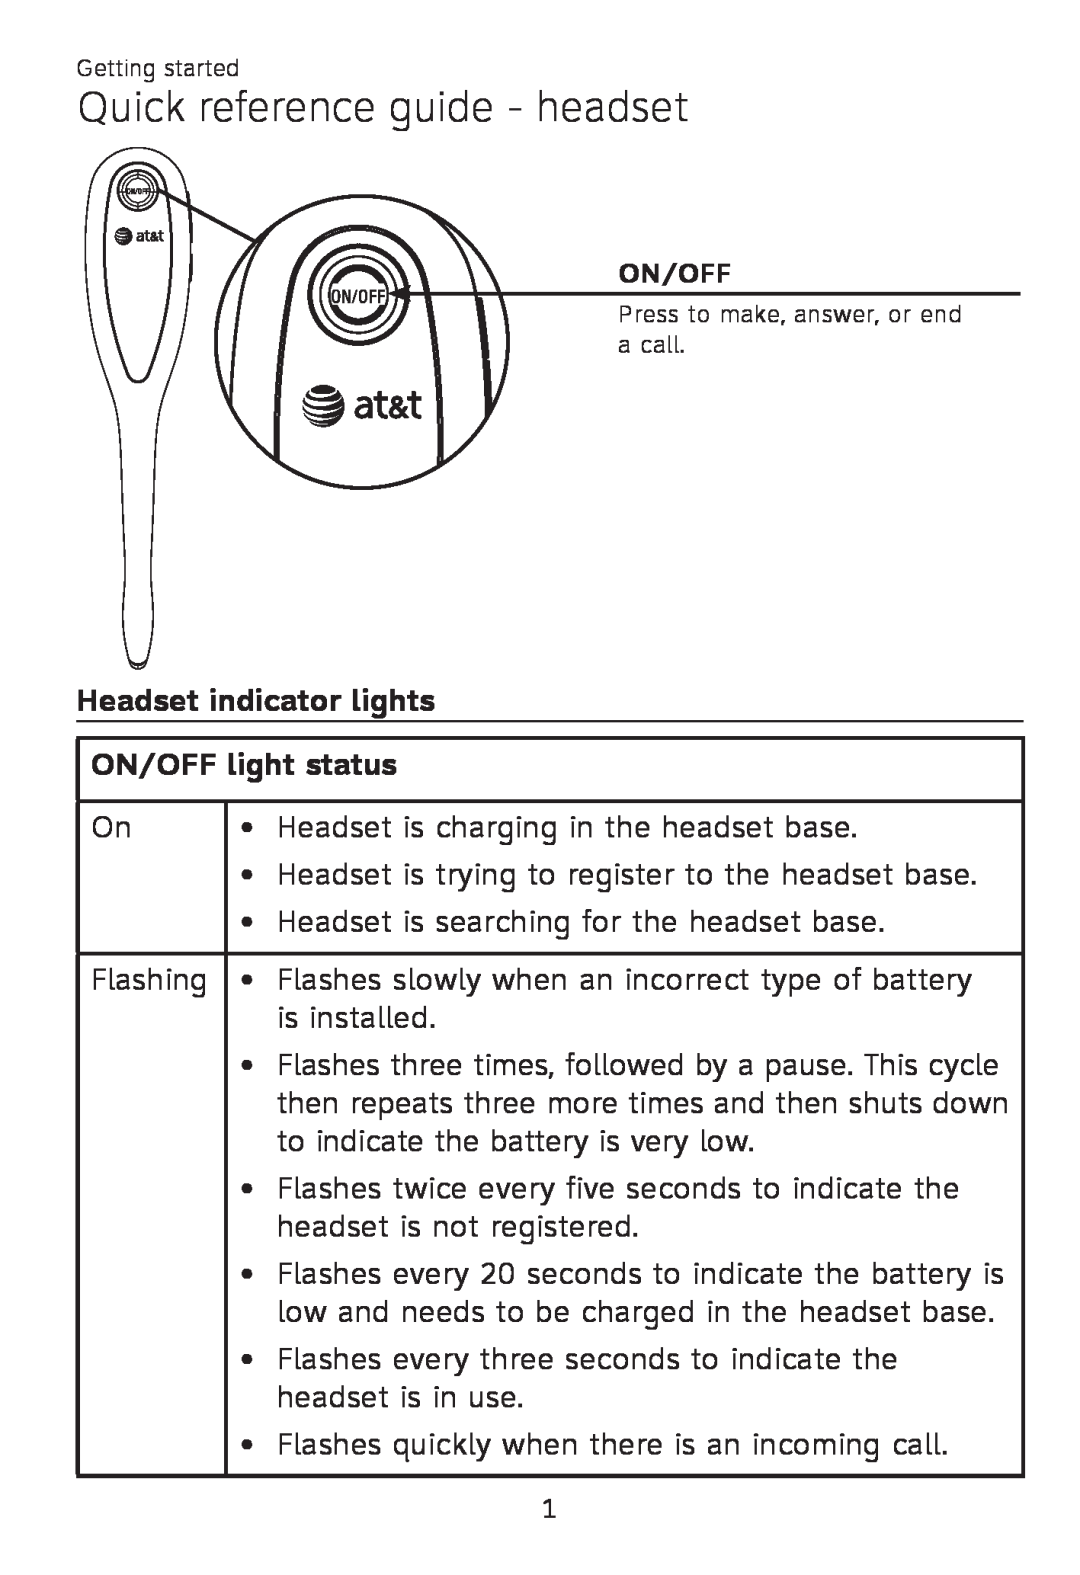 AT&T TL 7610 user manual Quick reference guide - headset, Headset indicator lights ON/OFF light status 